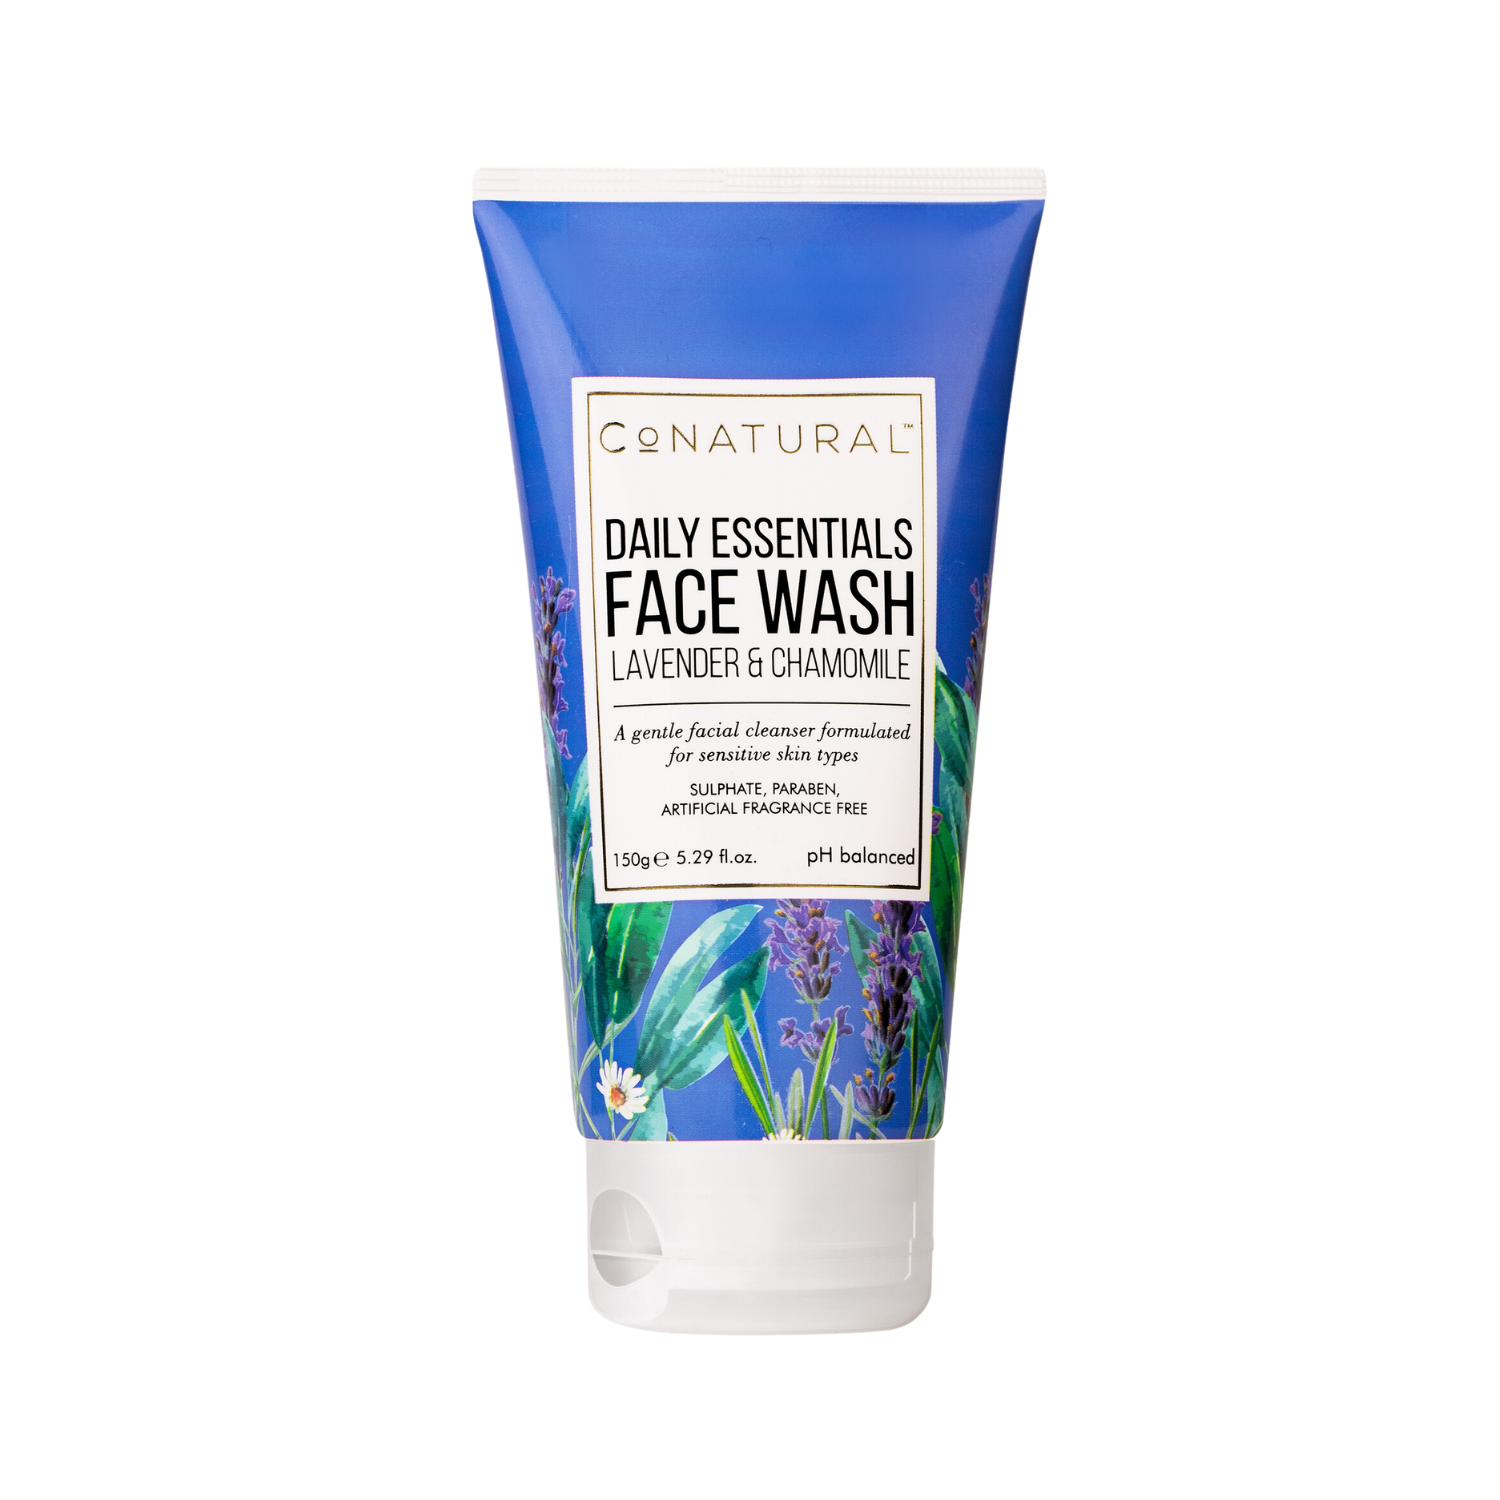 co-natural-daily-essentials-face-wash-150g